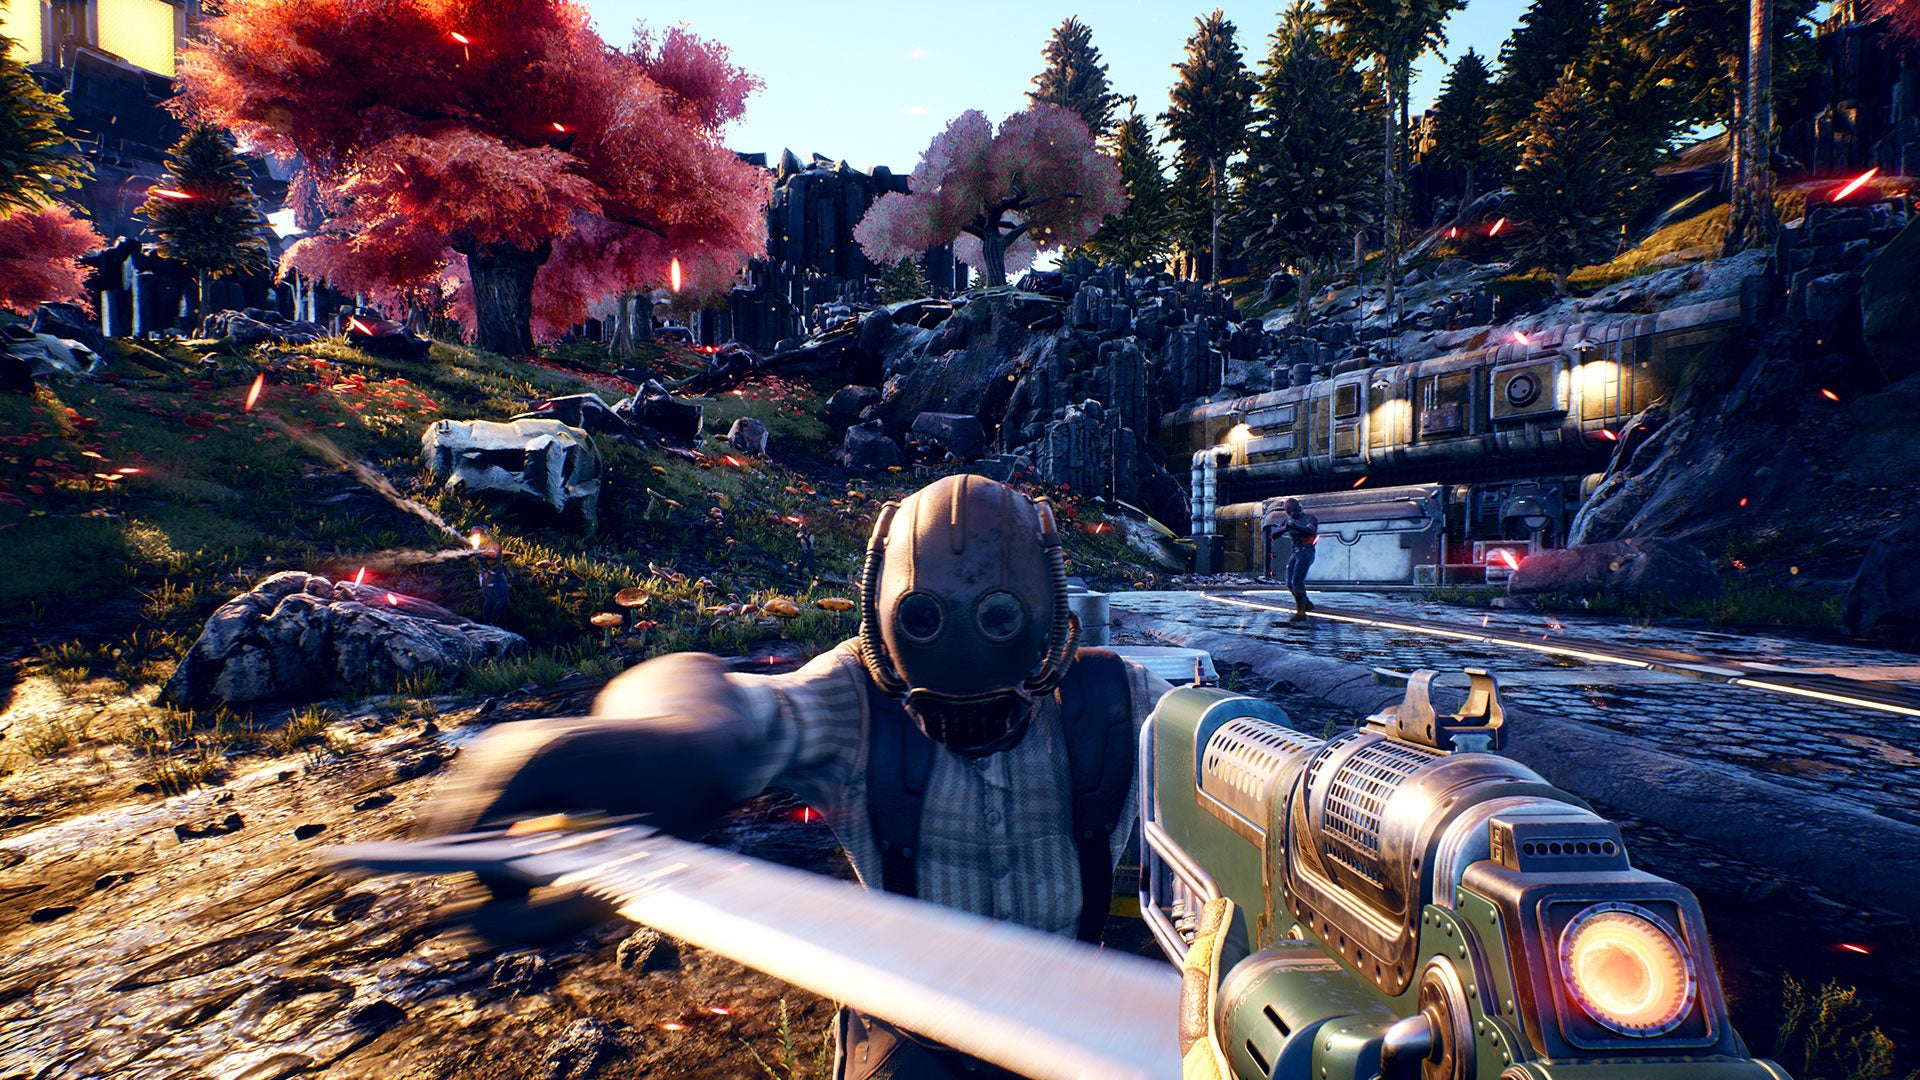 Image for The Outer Worlds is the latest Obsidian RPG - and it looks rather Fallout-like